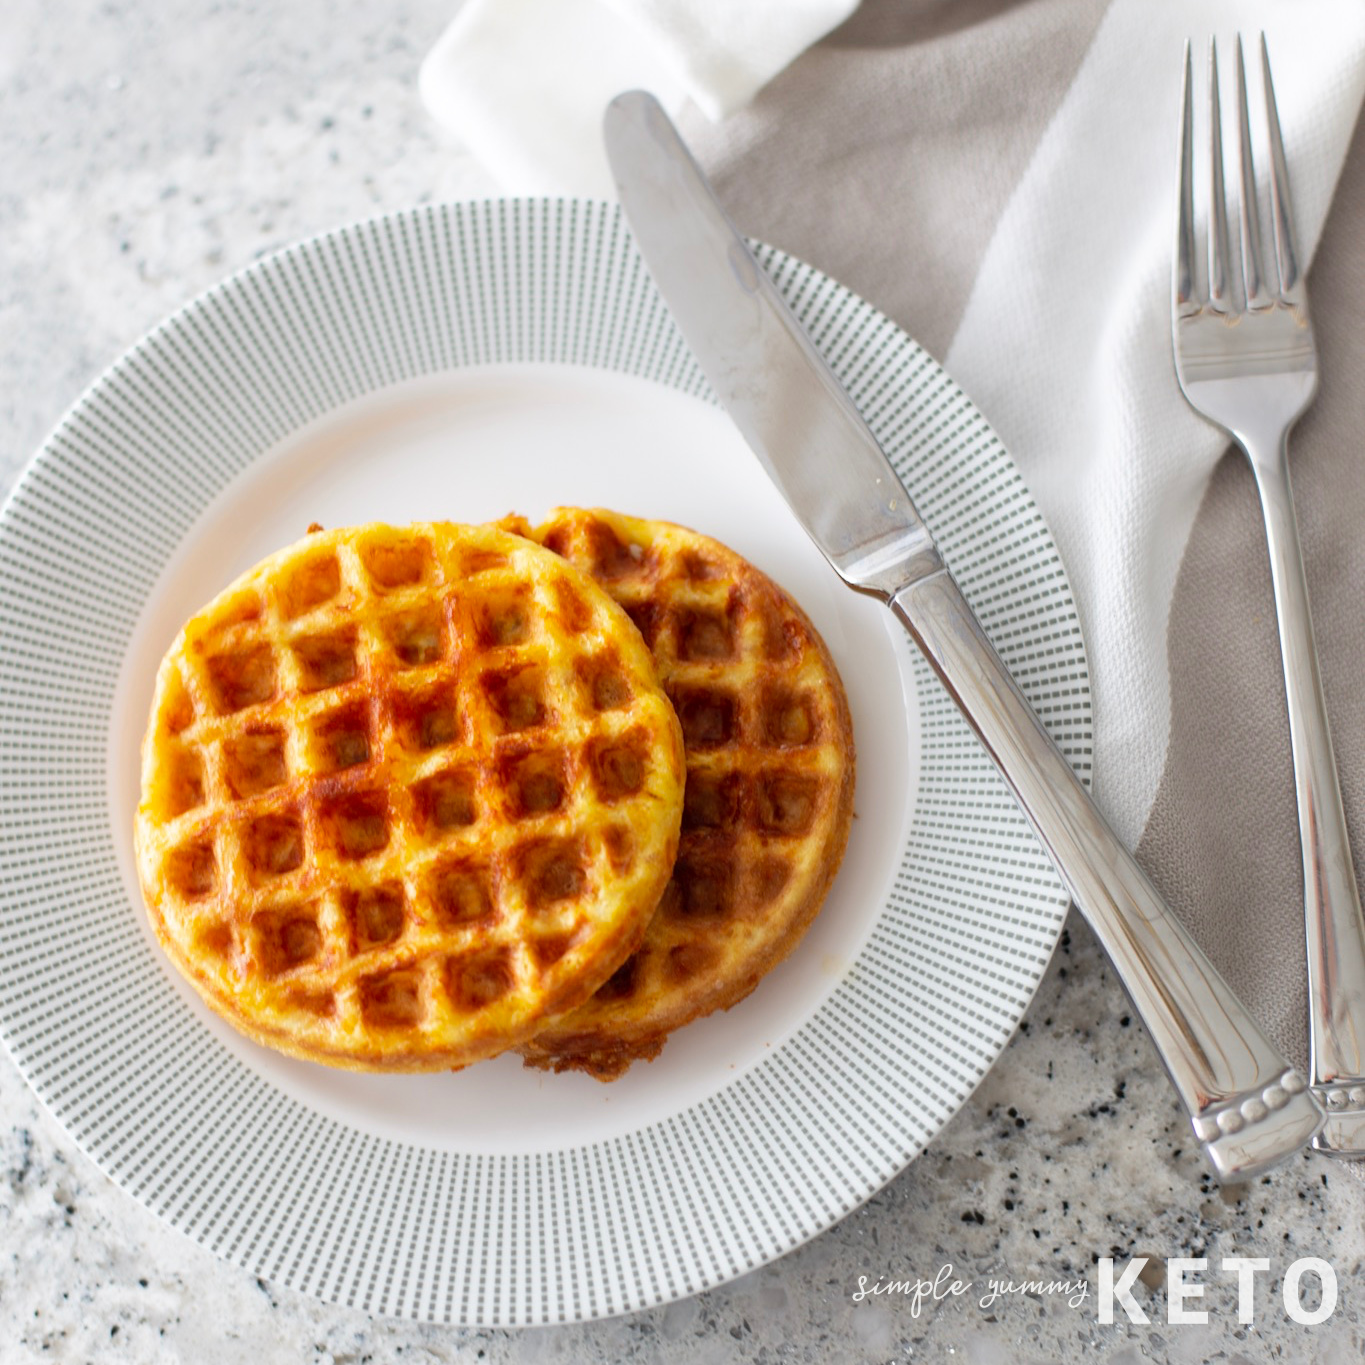 easy chaffle recipe that is low carb and keto friendly